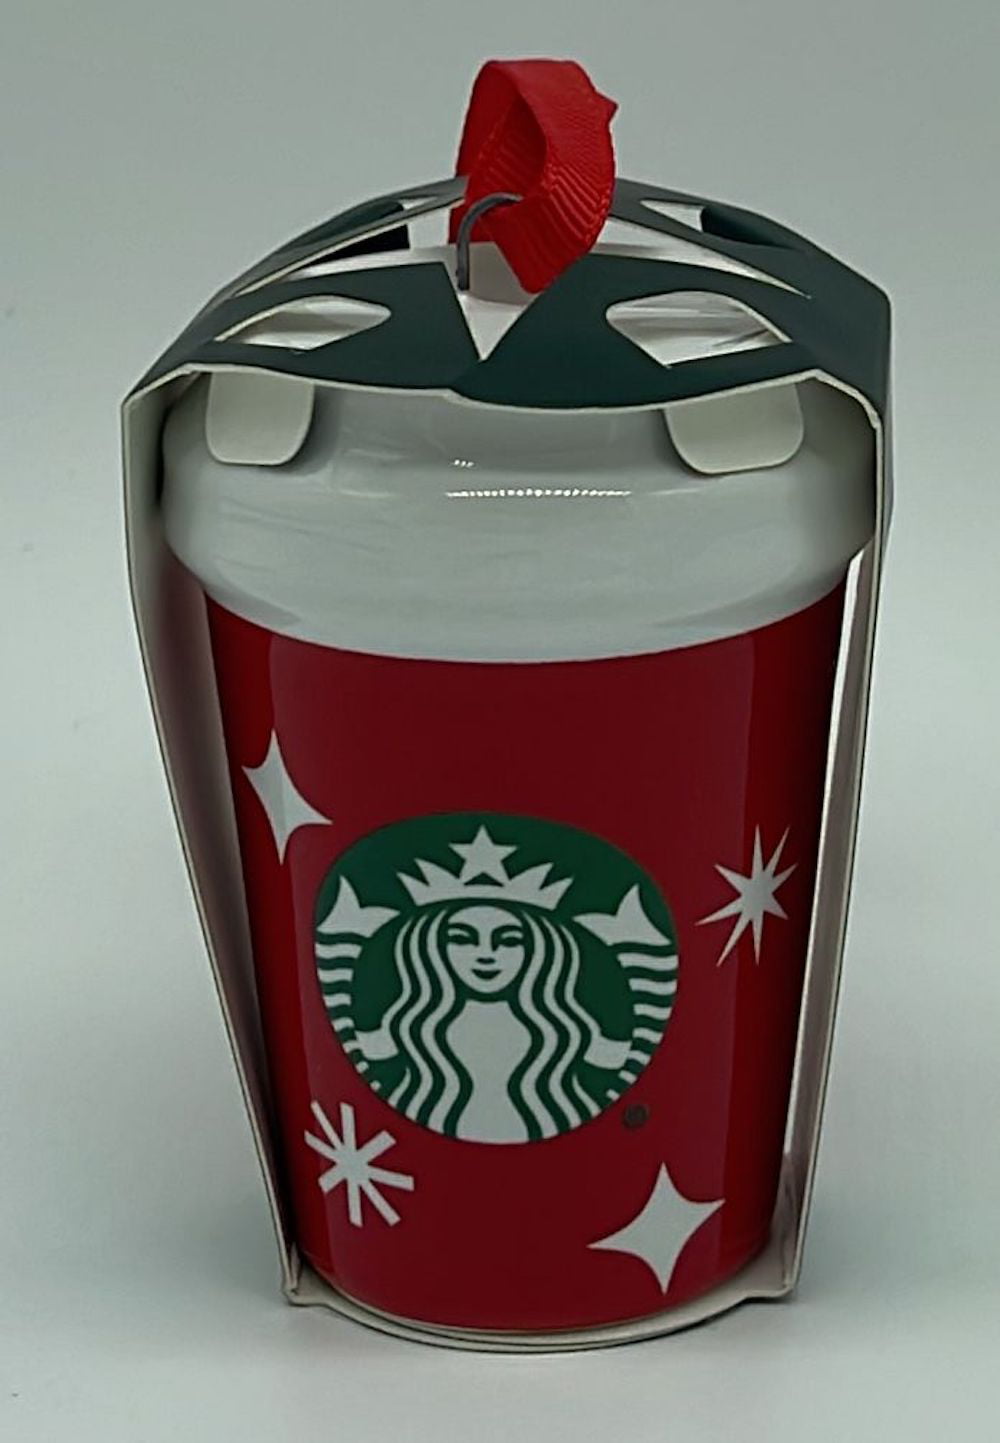  Starbucks Holiday 2022 Ornament Red with White Snowflakes